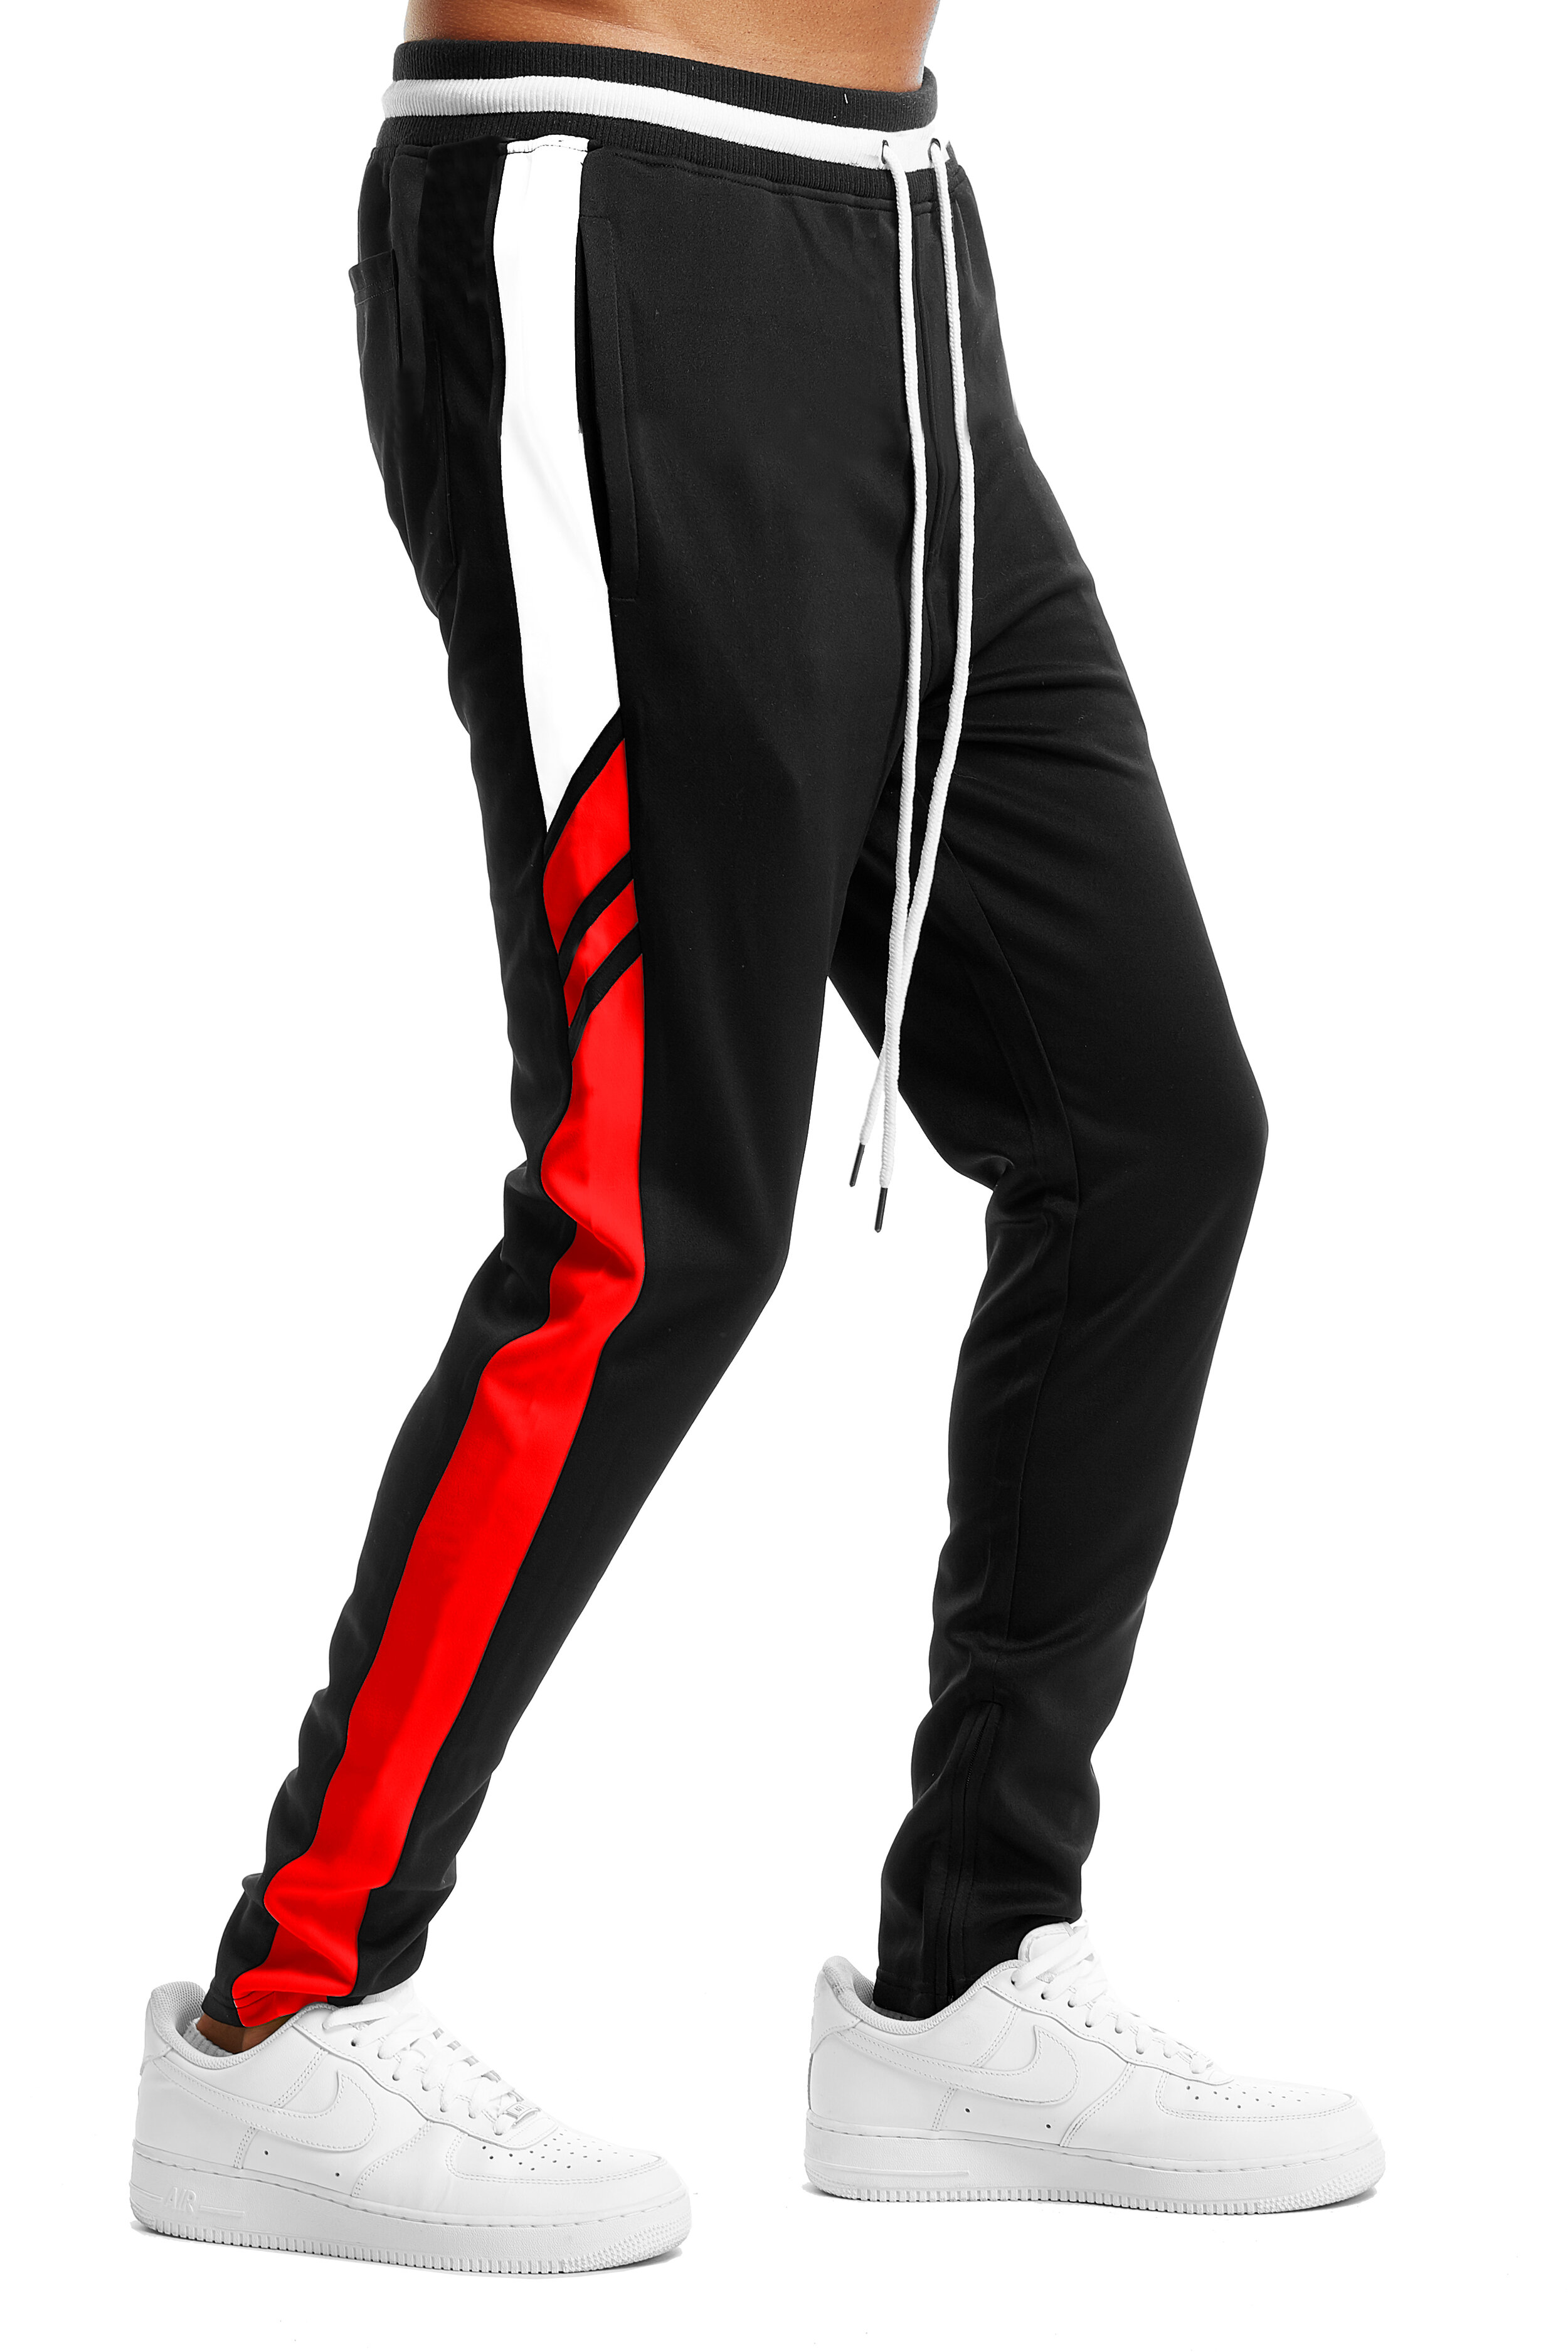 BLEECKER and MERCER BP0591 SLIM FIT TRACK PANTS with DIAGONAL SIDE 